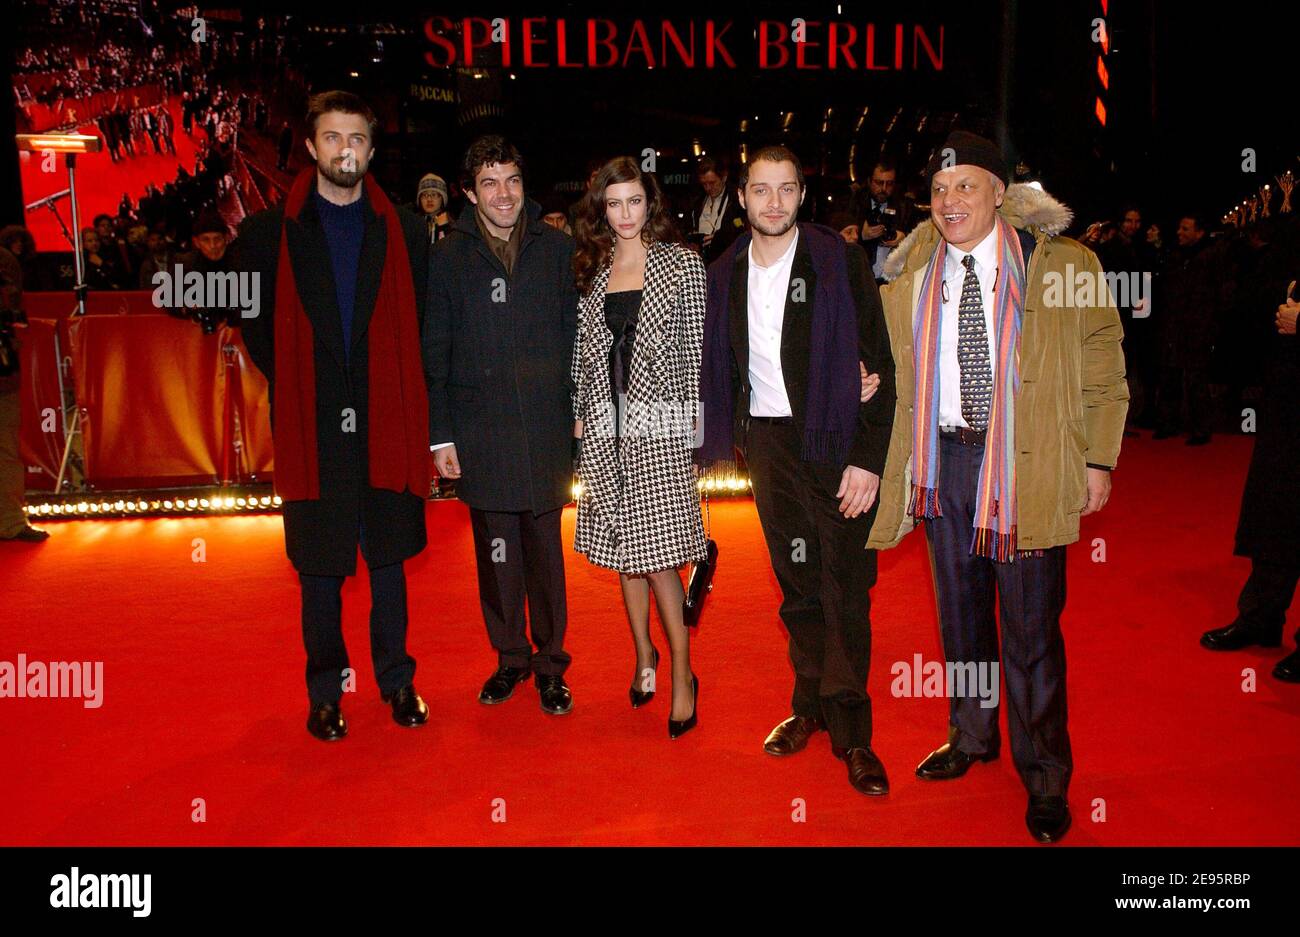 Us actor Kim Rossi Stuart, Italian actor Pierfrancesco Favino, Italian Actor Claudio Santamaria, French actress Anna Mouglalis and Italian movie director Michele Placido attend the premiere of their movie 'Romanzo Criminale' during the 56 th Berlin International Film Festival in Berlin, Germany on February 15, 2006. Photo by Bruno Klein/ABACAPRESS.COM. Stock Photo